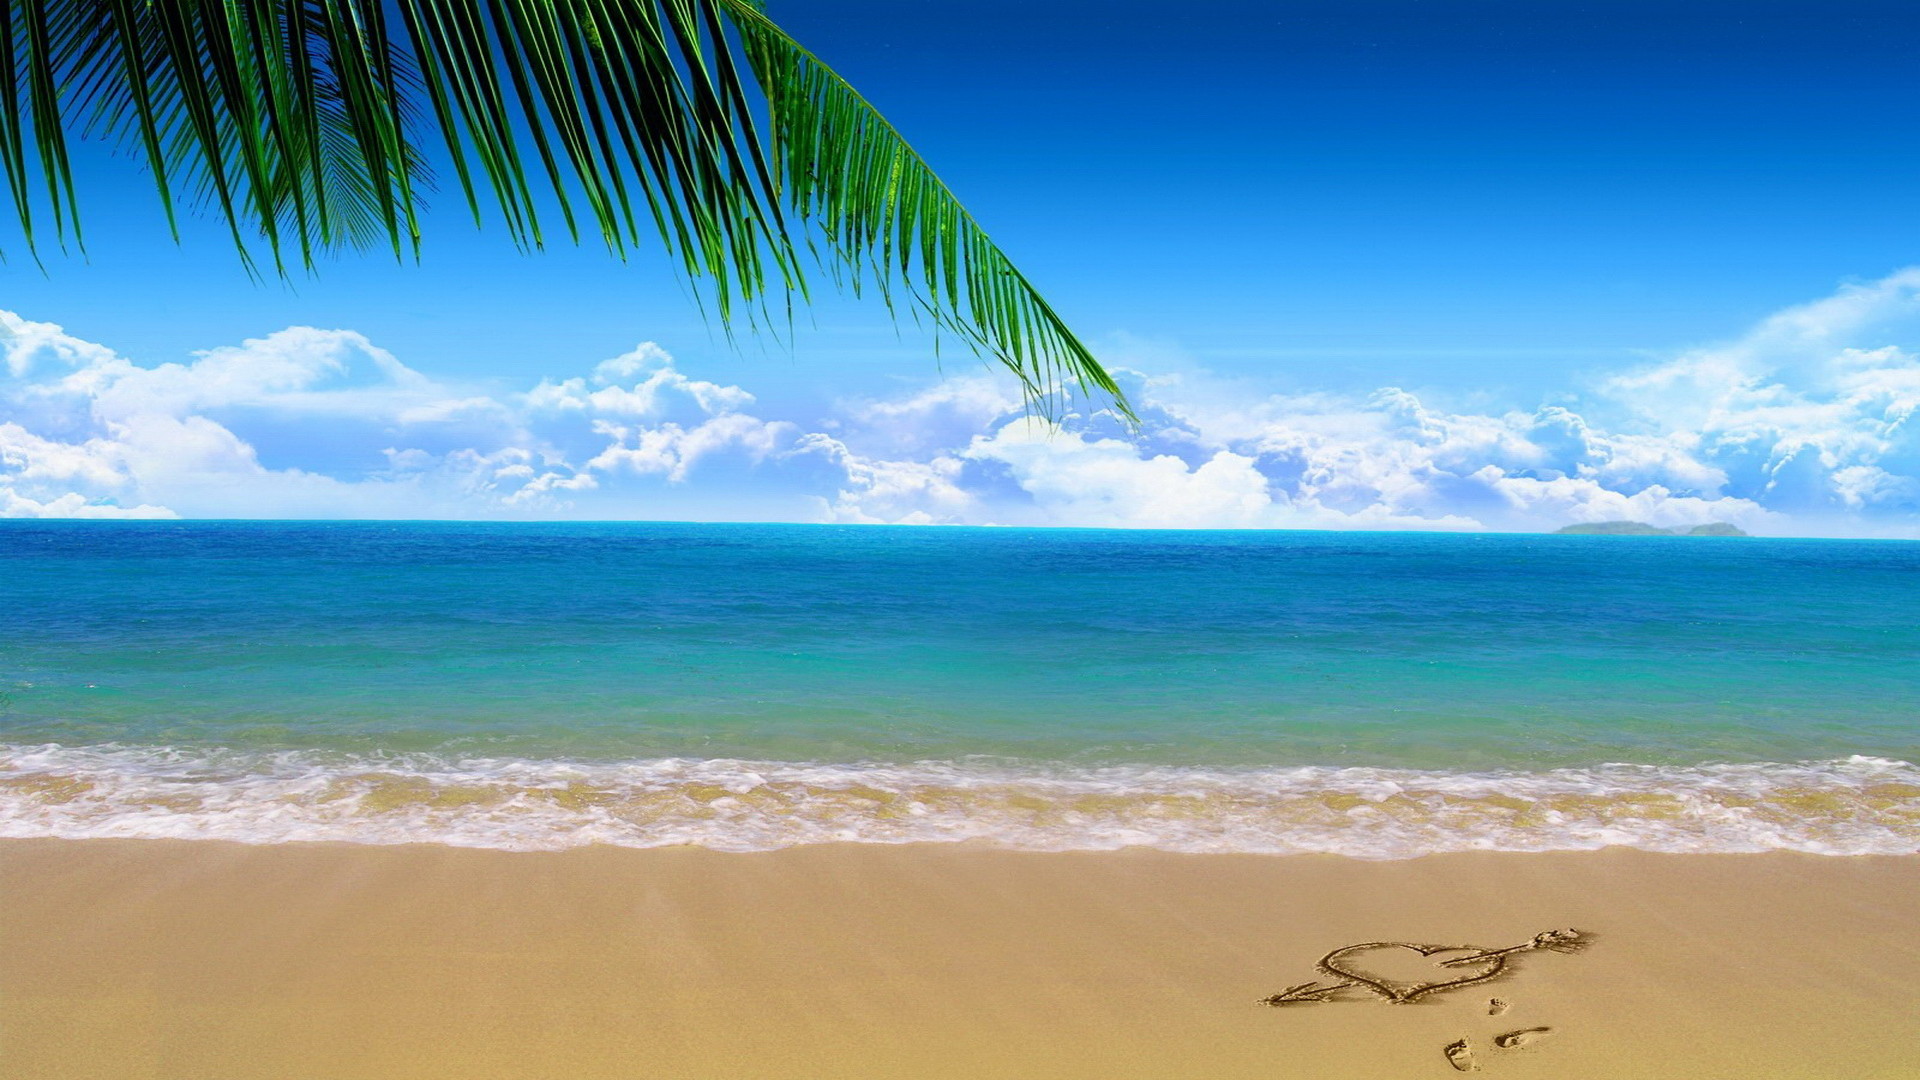 Beach Background Pictures (58+ images).